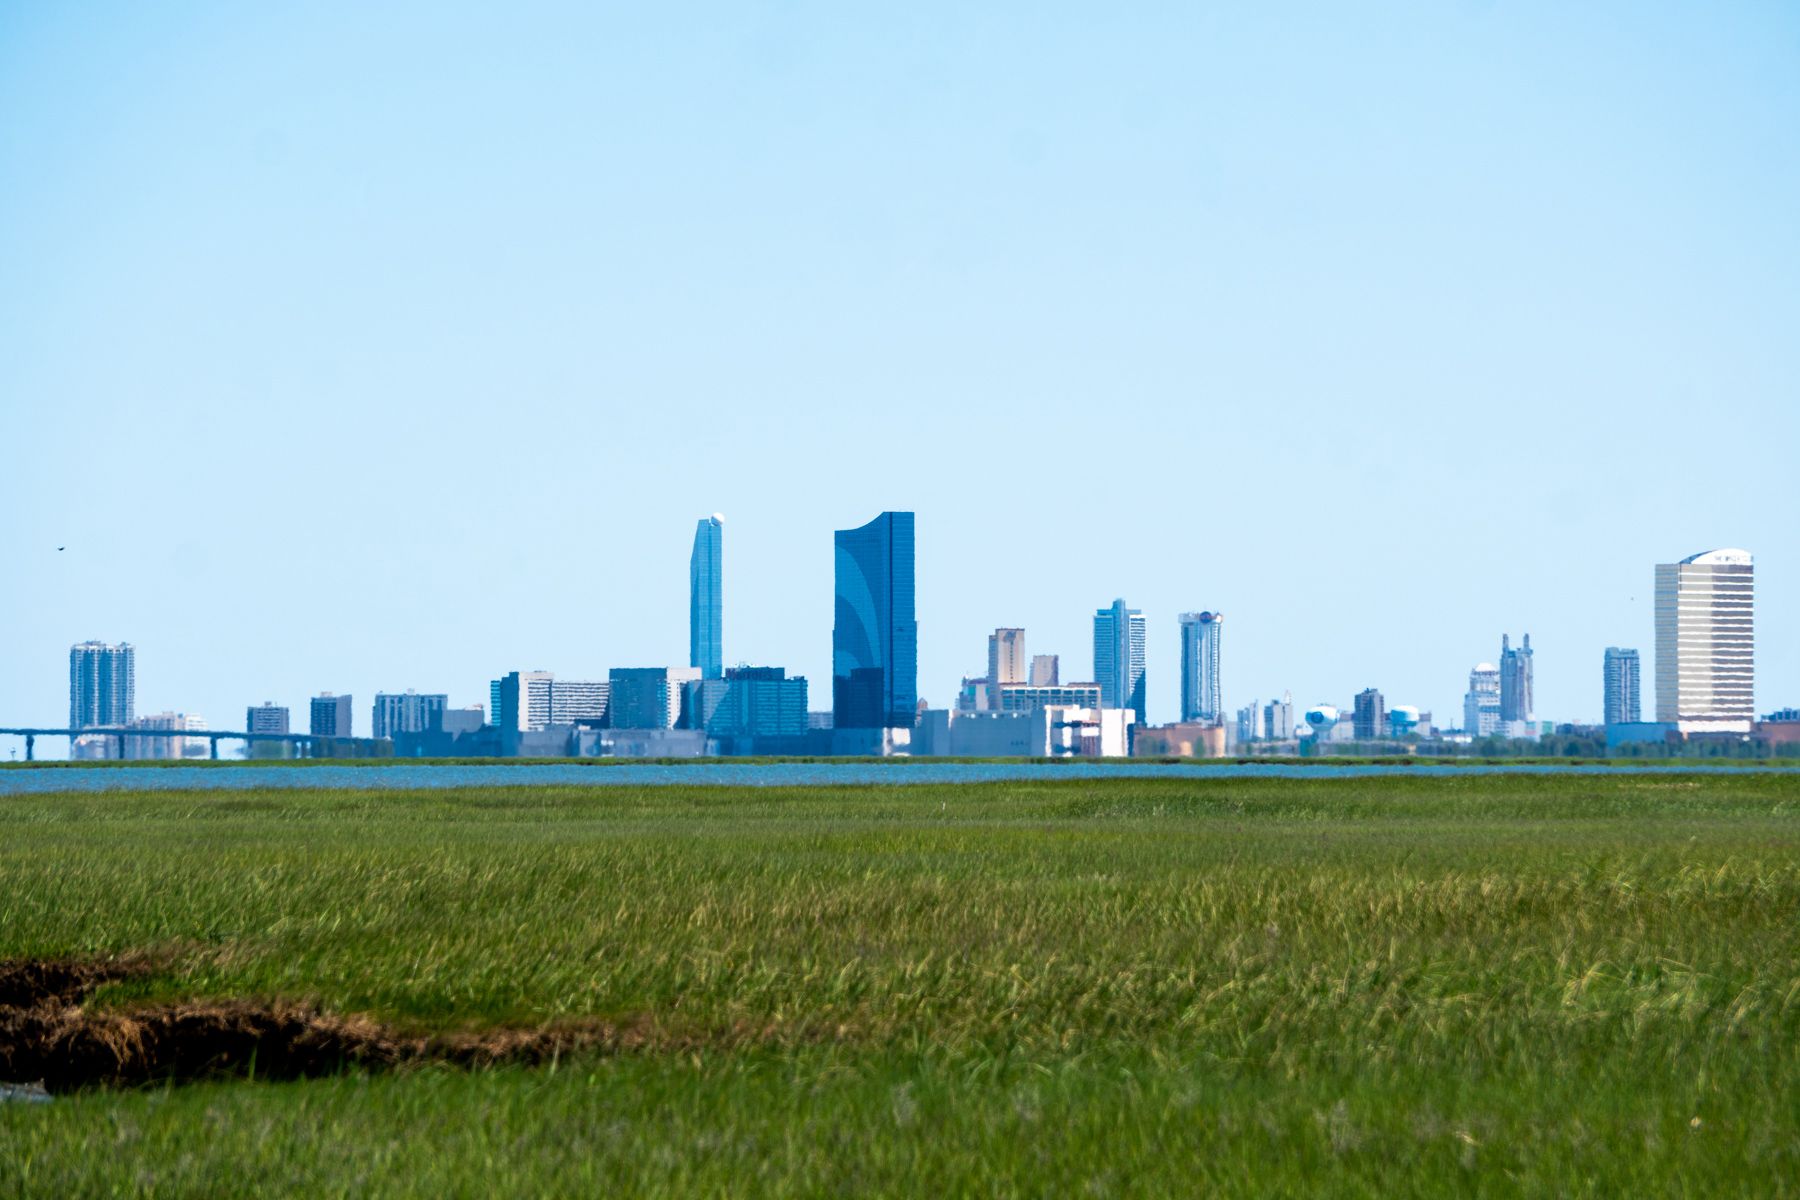 The Atlantic City skyline as seen from the Reeds Bay